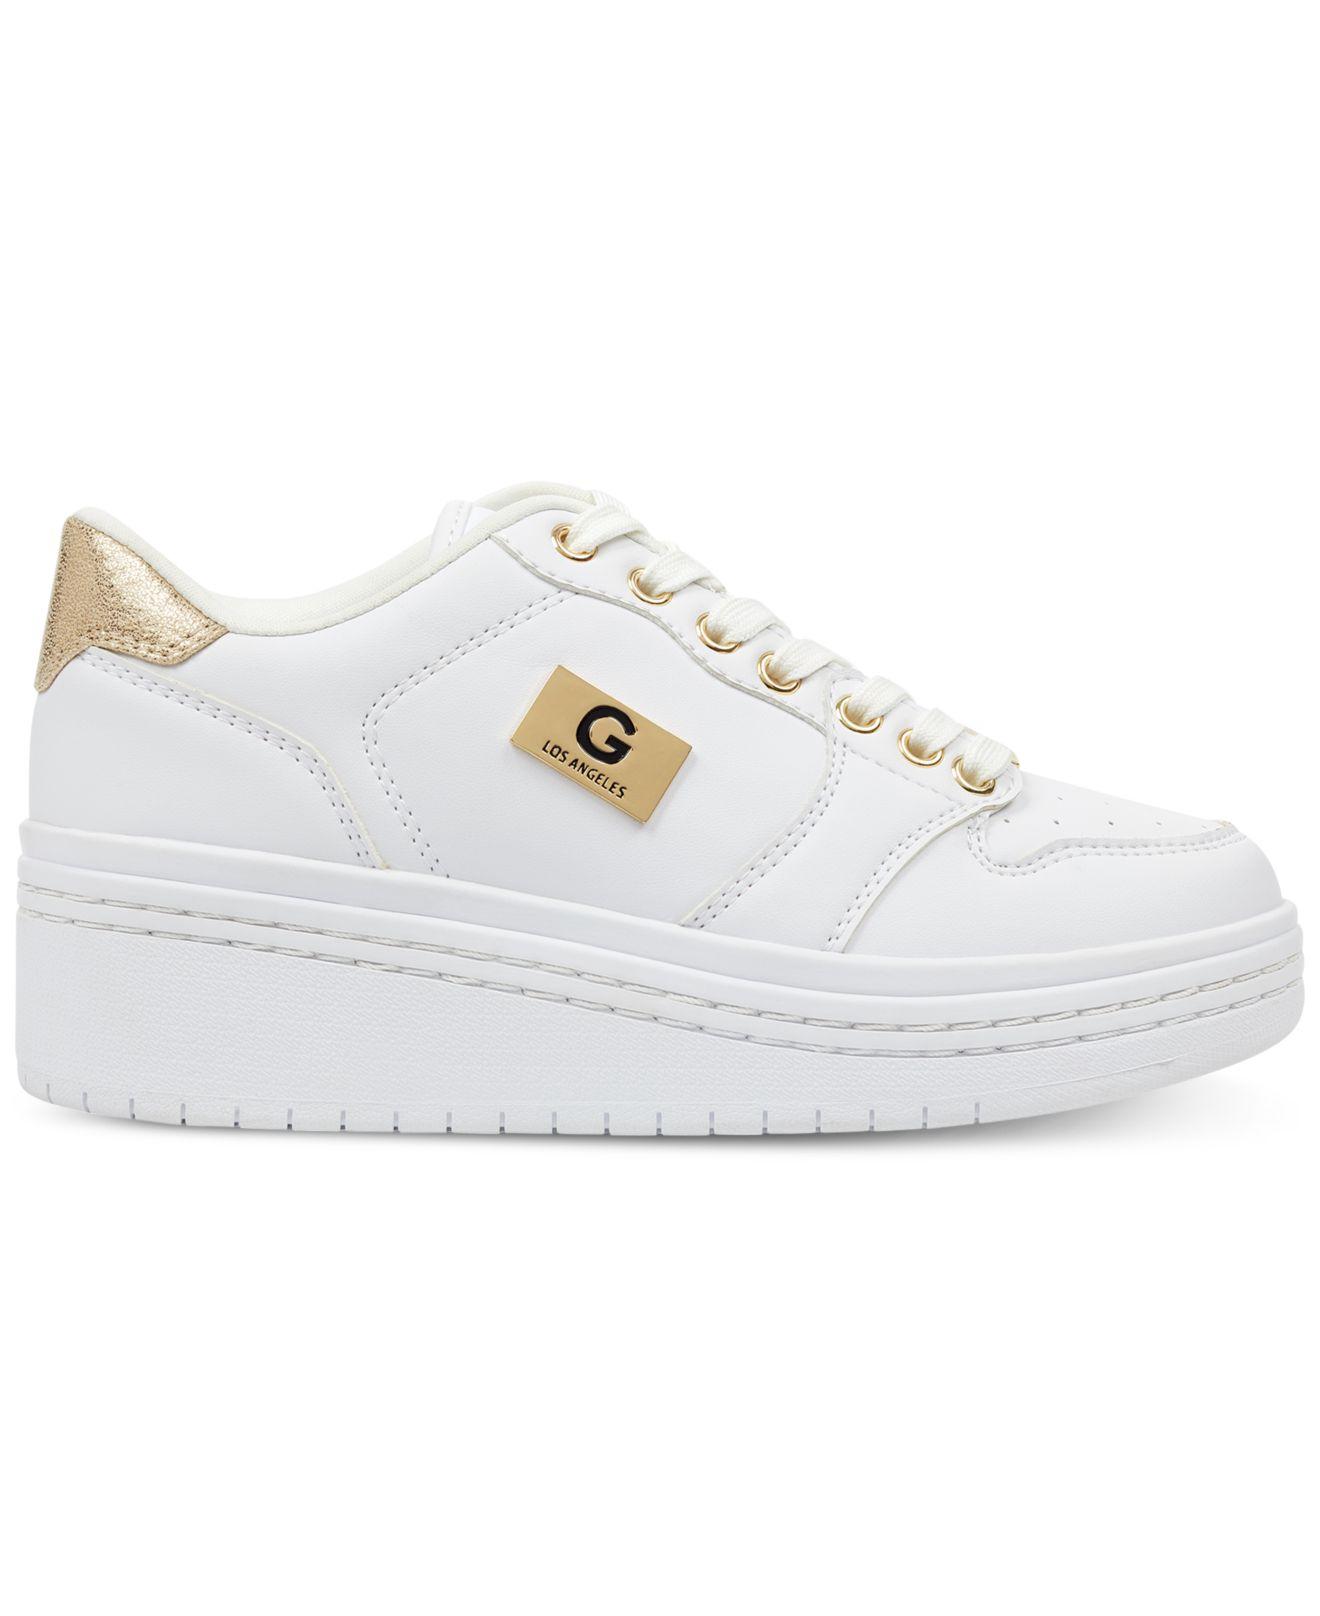 G by Guess Gbg Los Angeles Rigster Wedge Sneakers in White | Lyst